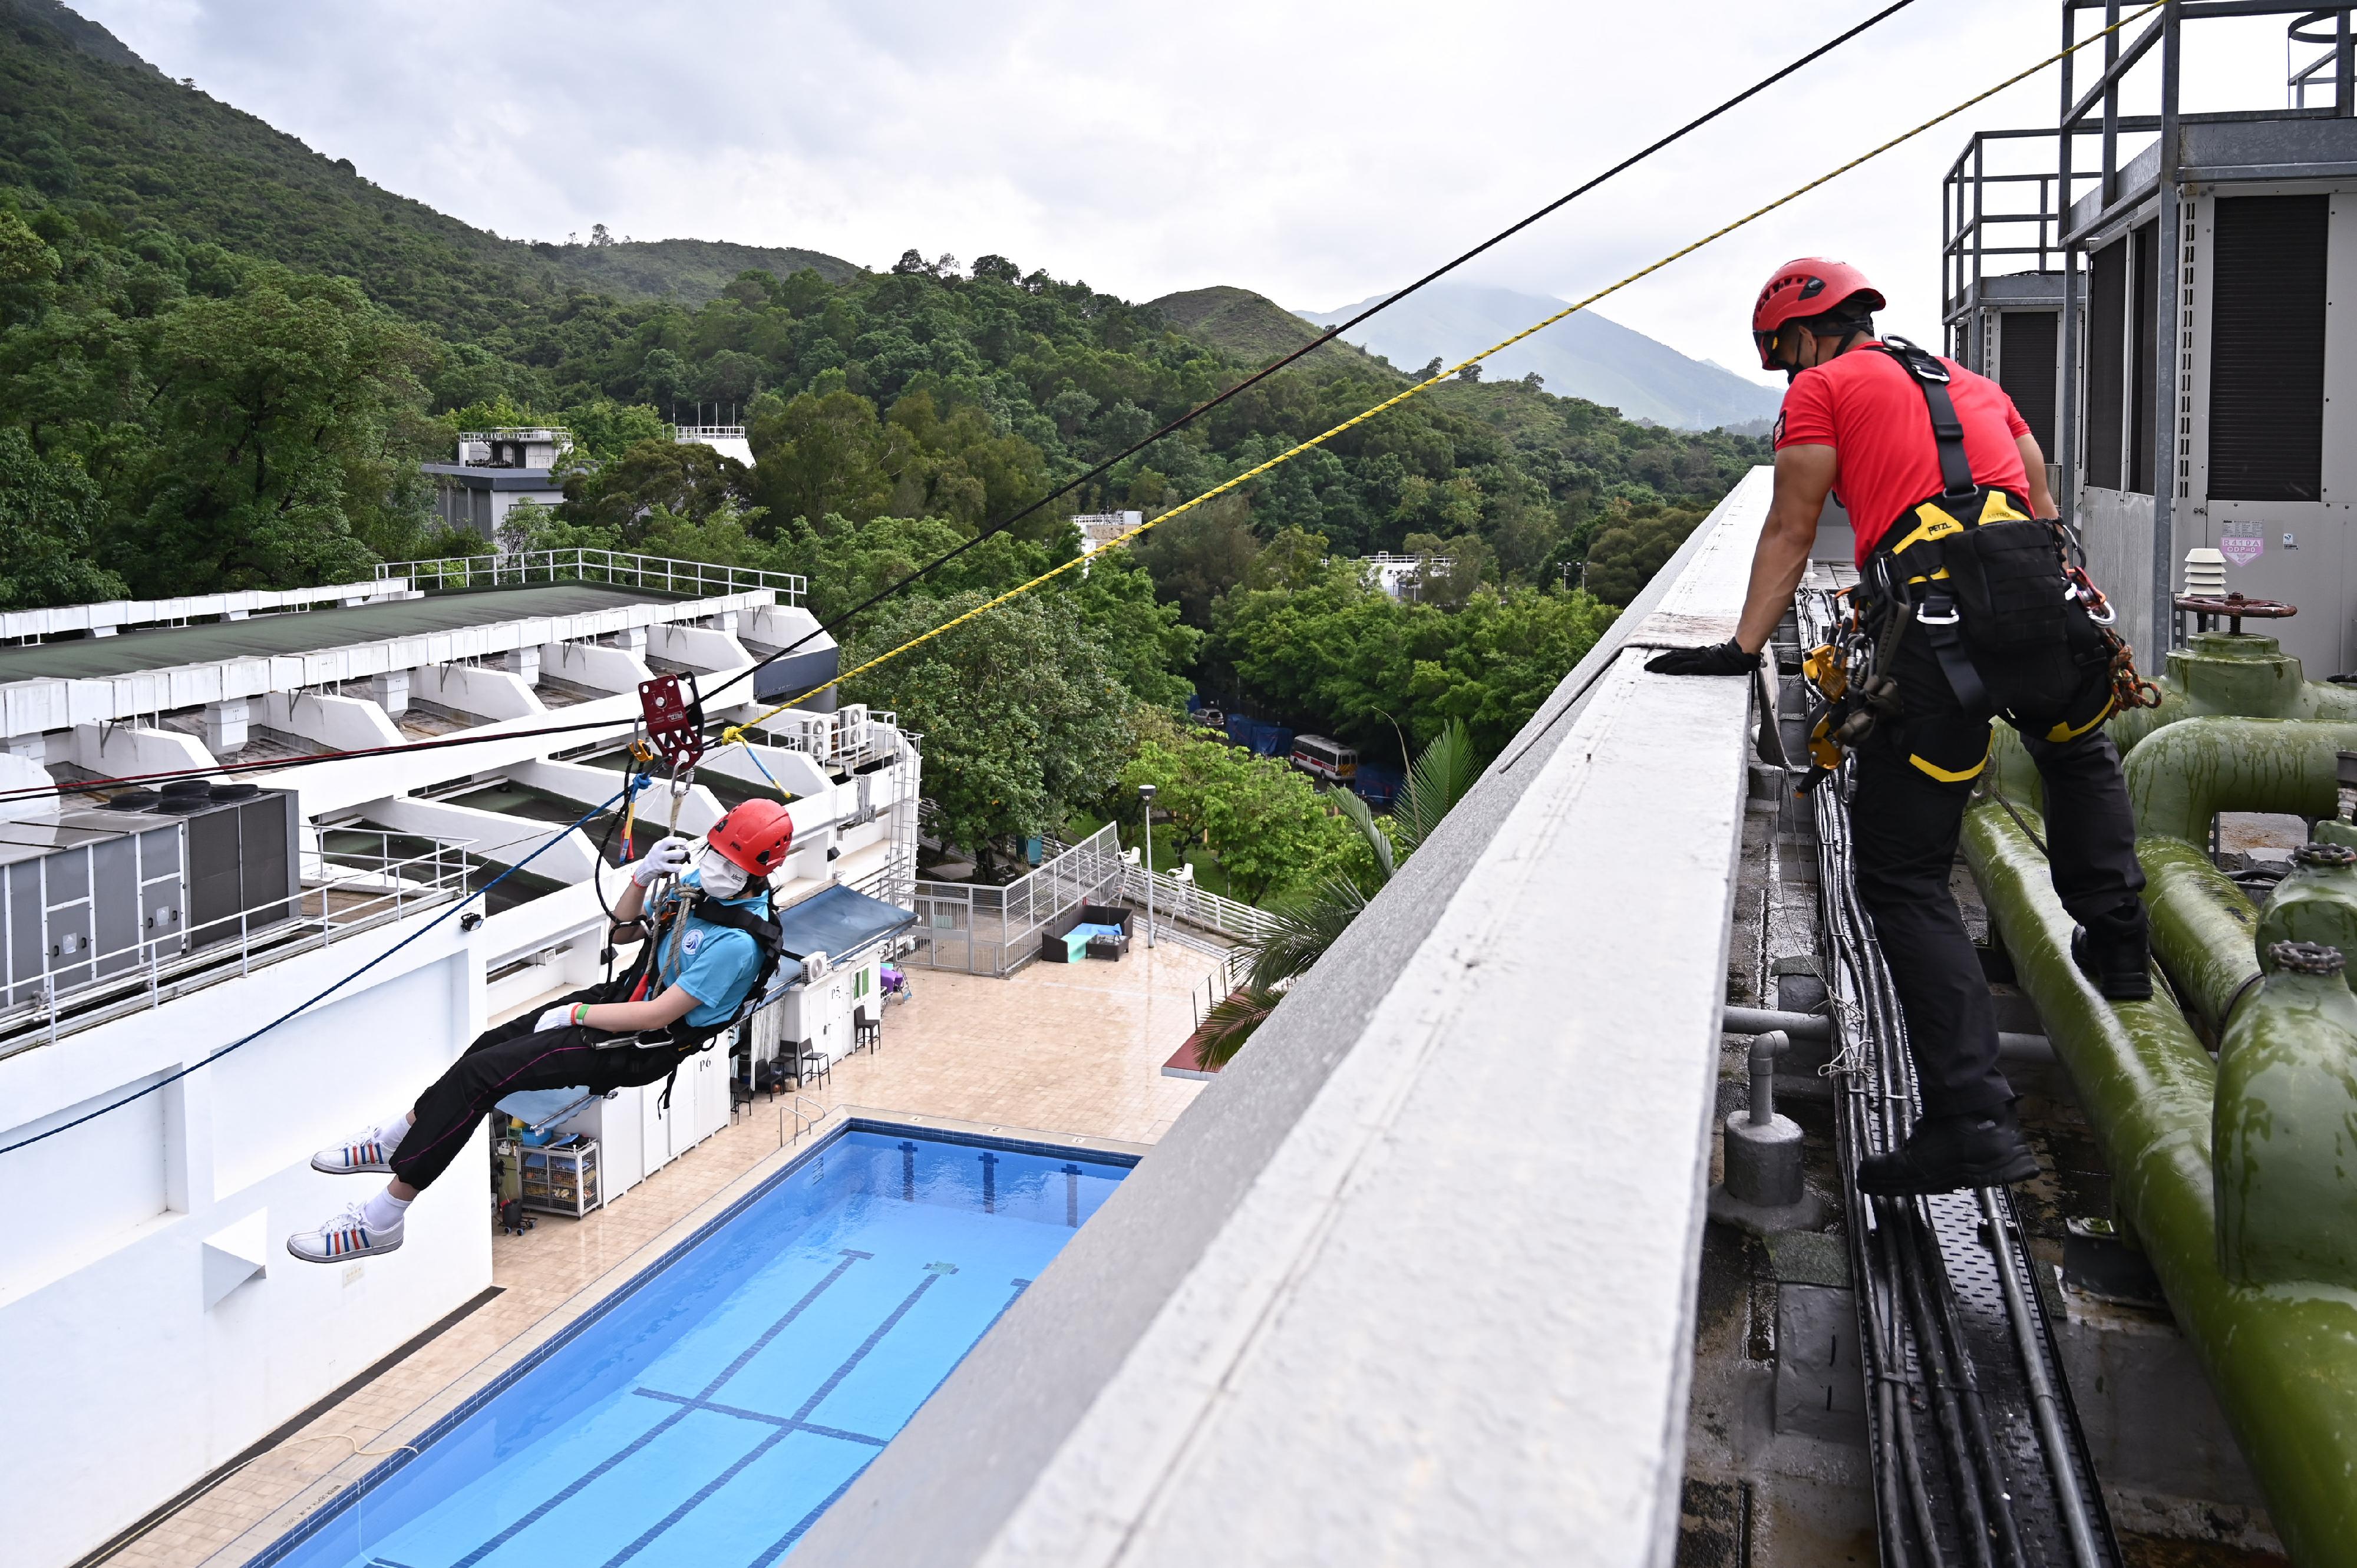 The Hong Kong Police Force today (June 11) launched a one-year anti-drug youth leadership development programme, "Leadership Institute on Narcotics". Photo shows the participants taking part in zip line activity during the training session this morning.